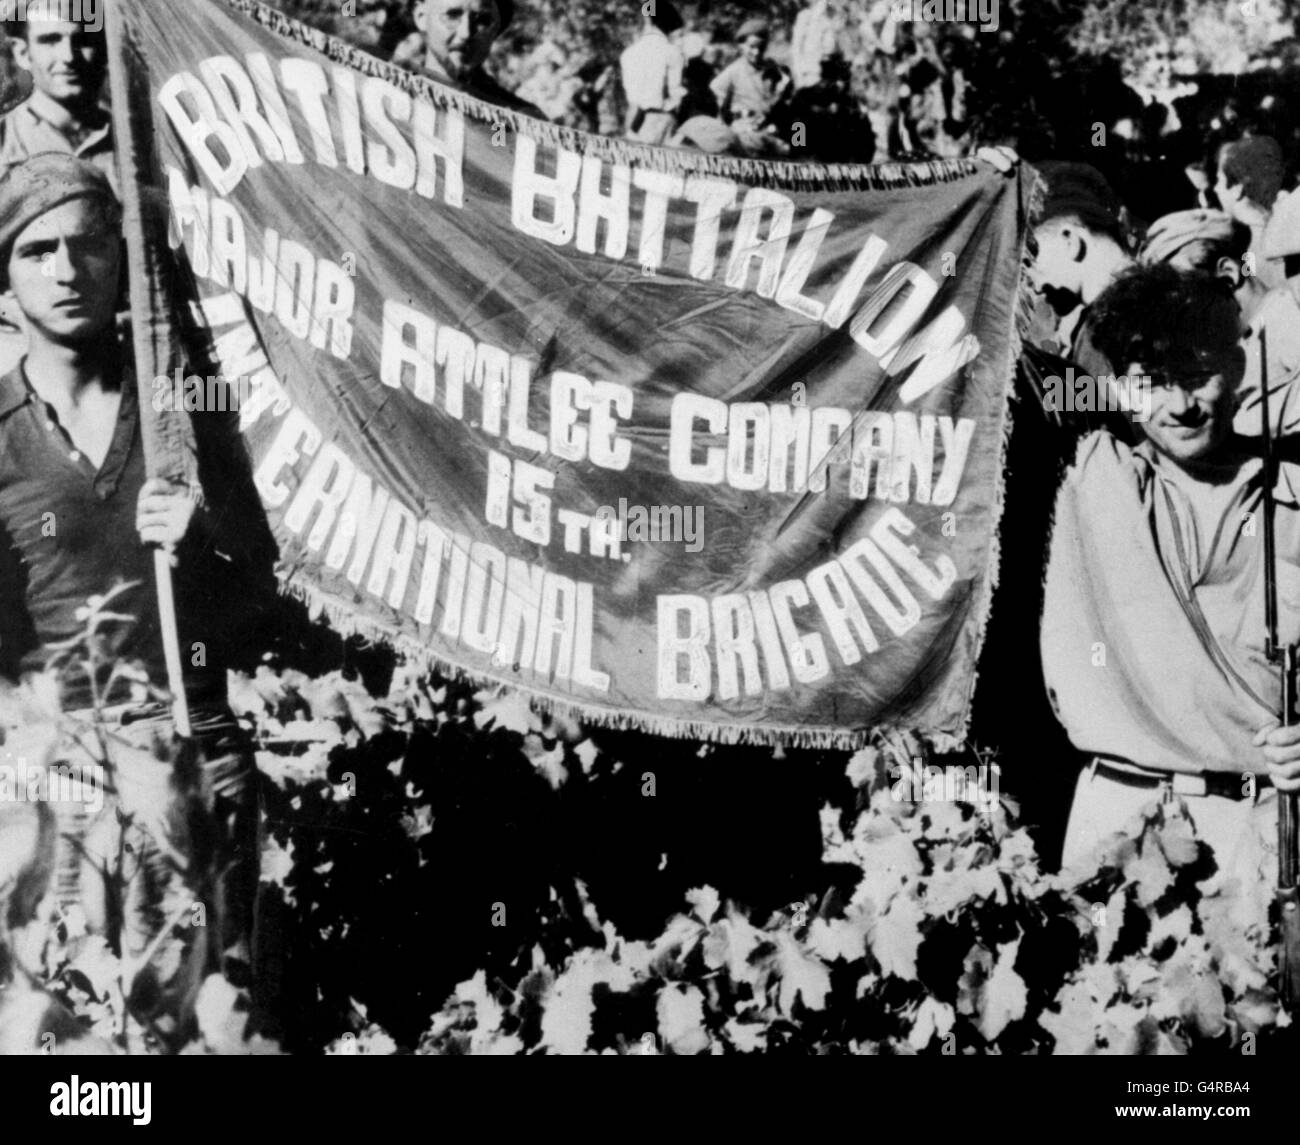 c1936: Members of the British Battalion, Major Attlee Company, 15th International Brigade, displaying their banner during a lull in the fighting during the Spanish Civil War of 1936-1939. Stock Photo